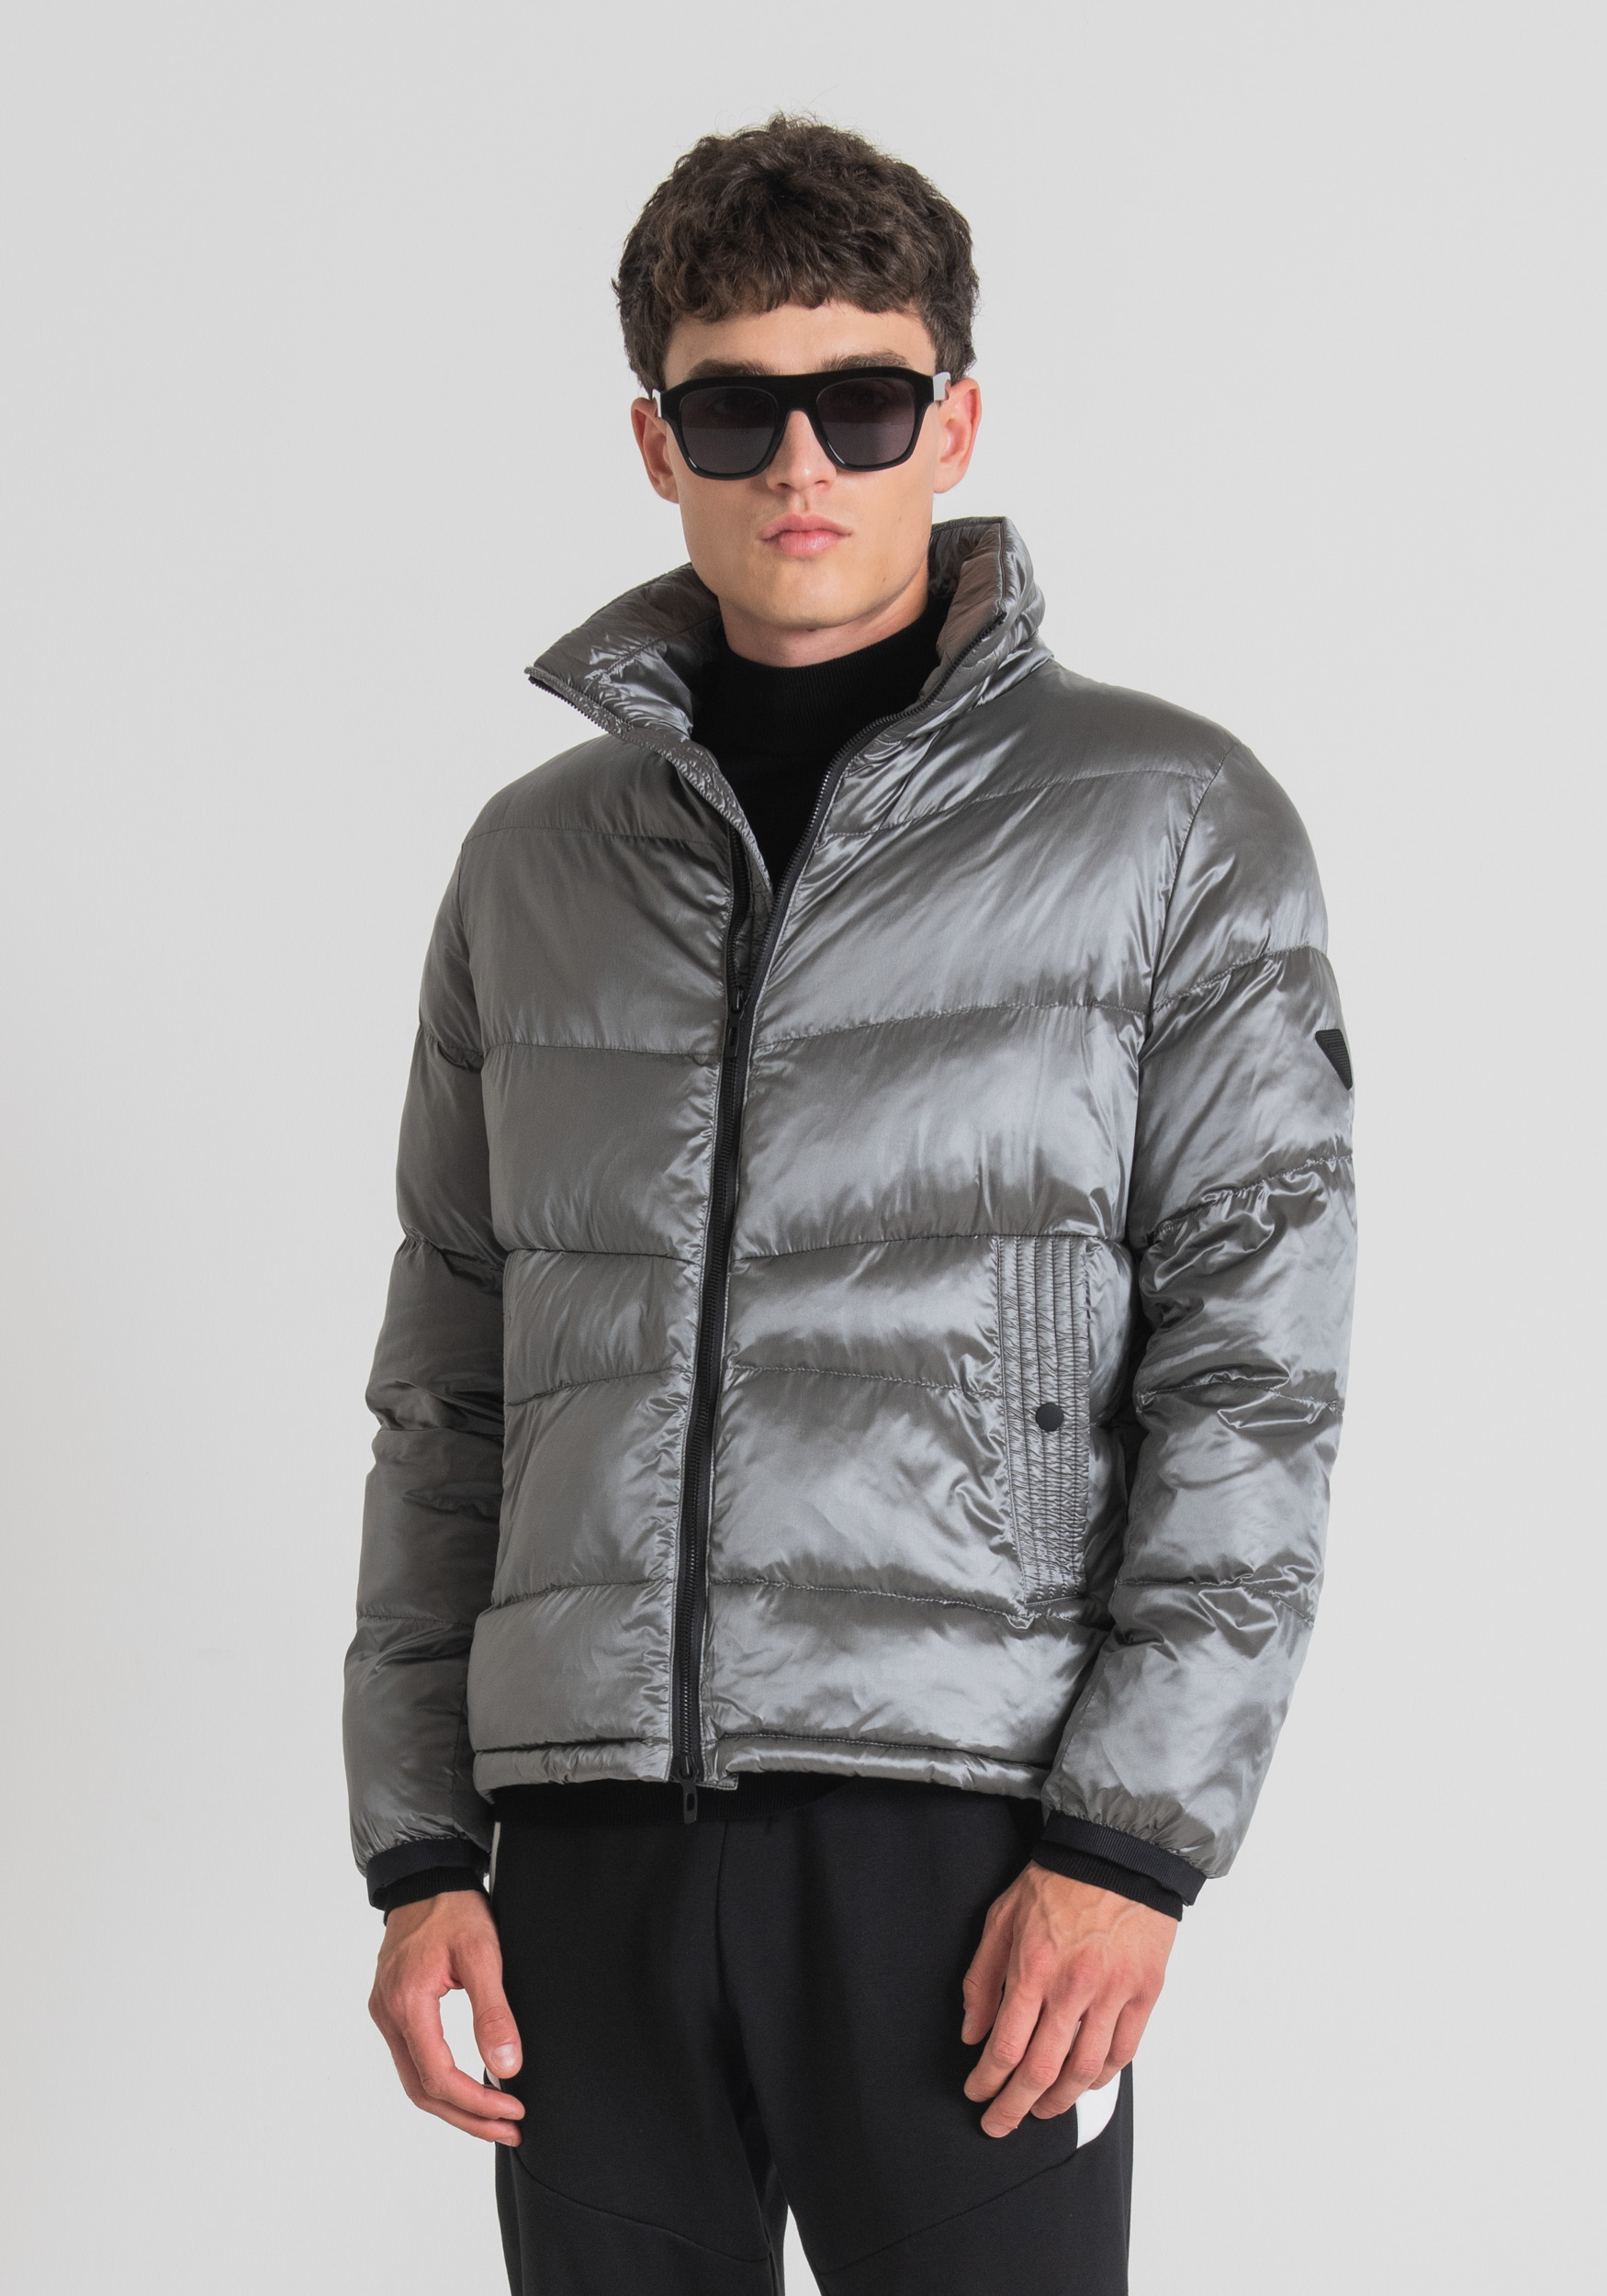 REGULAR FIT JACKET WITH ECO-SUSTAINABLE PADDING WITH AN IRIDESCENT EFFECT